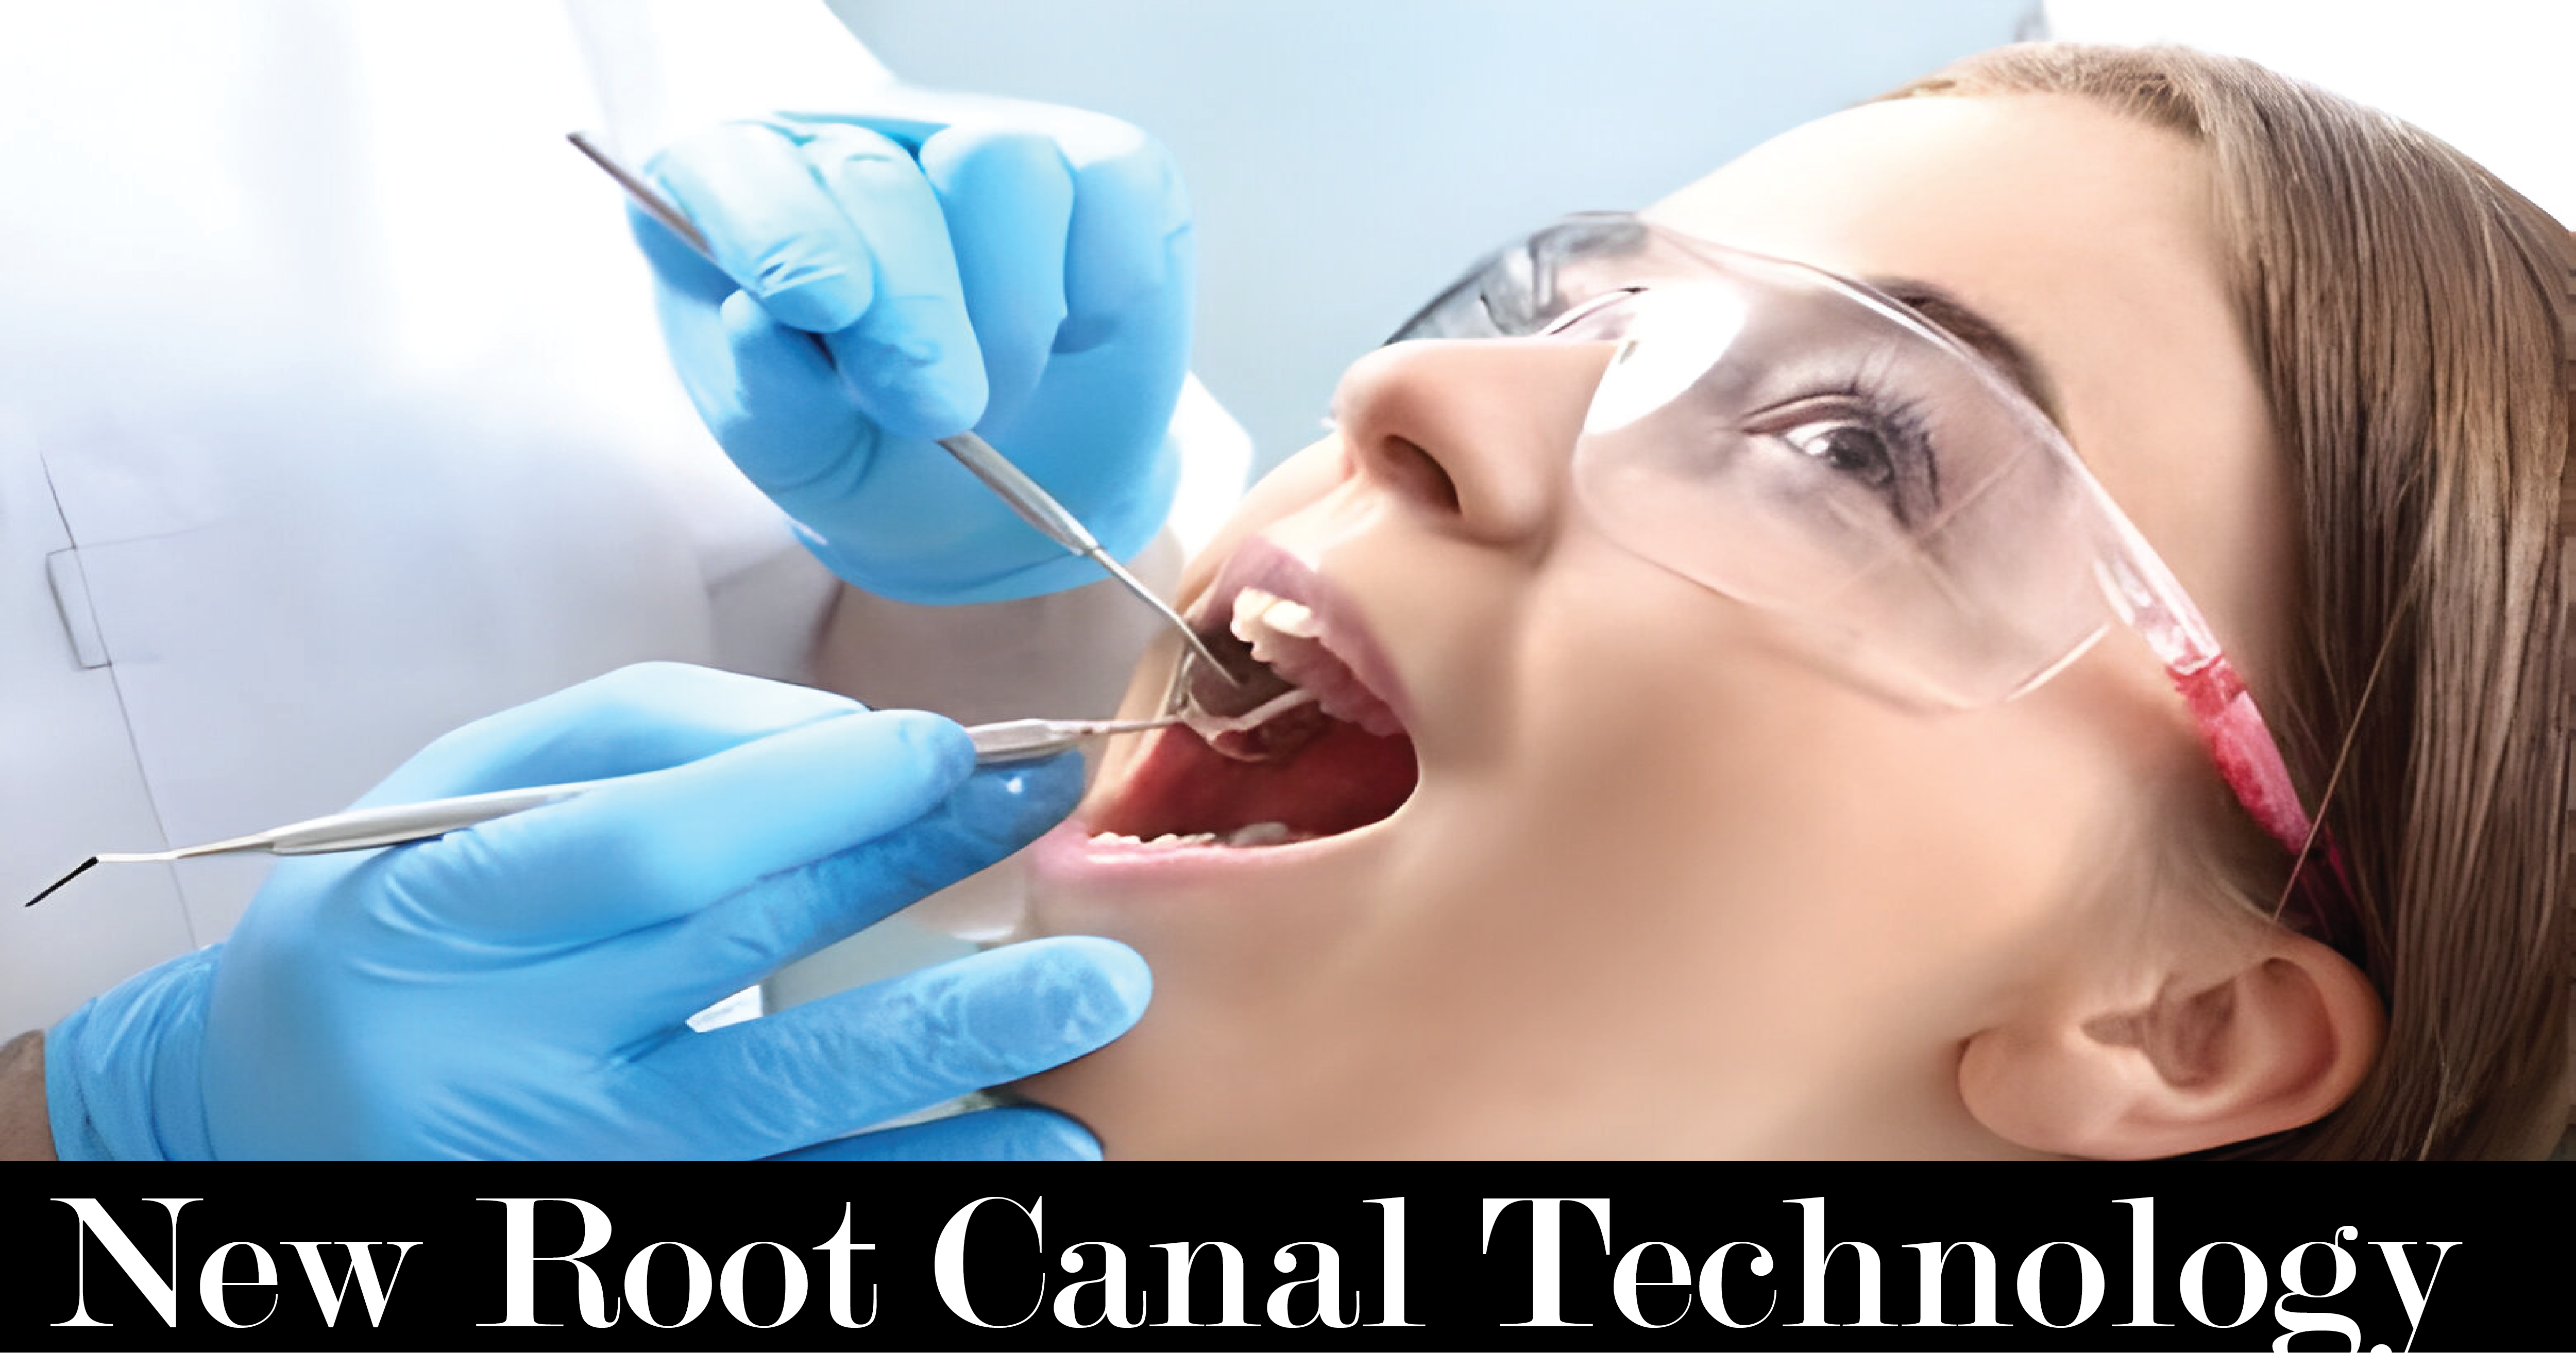 New Root Canal Technology